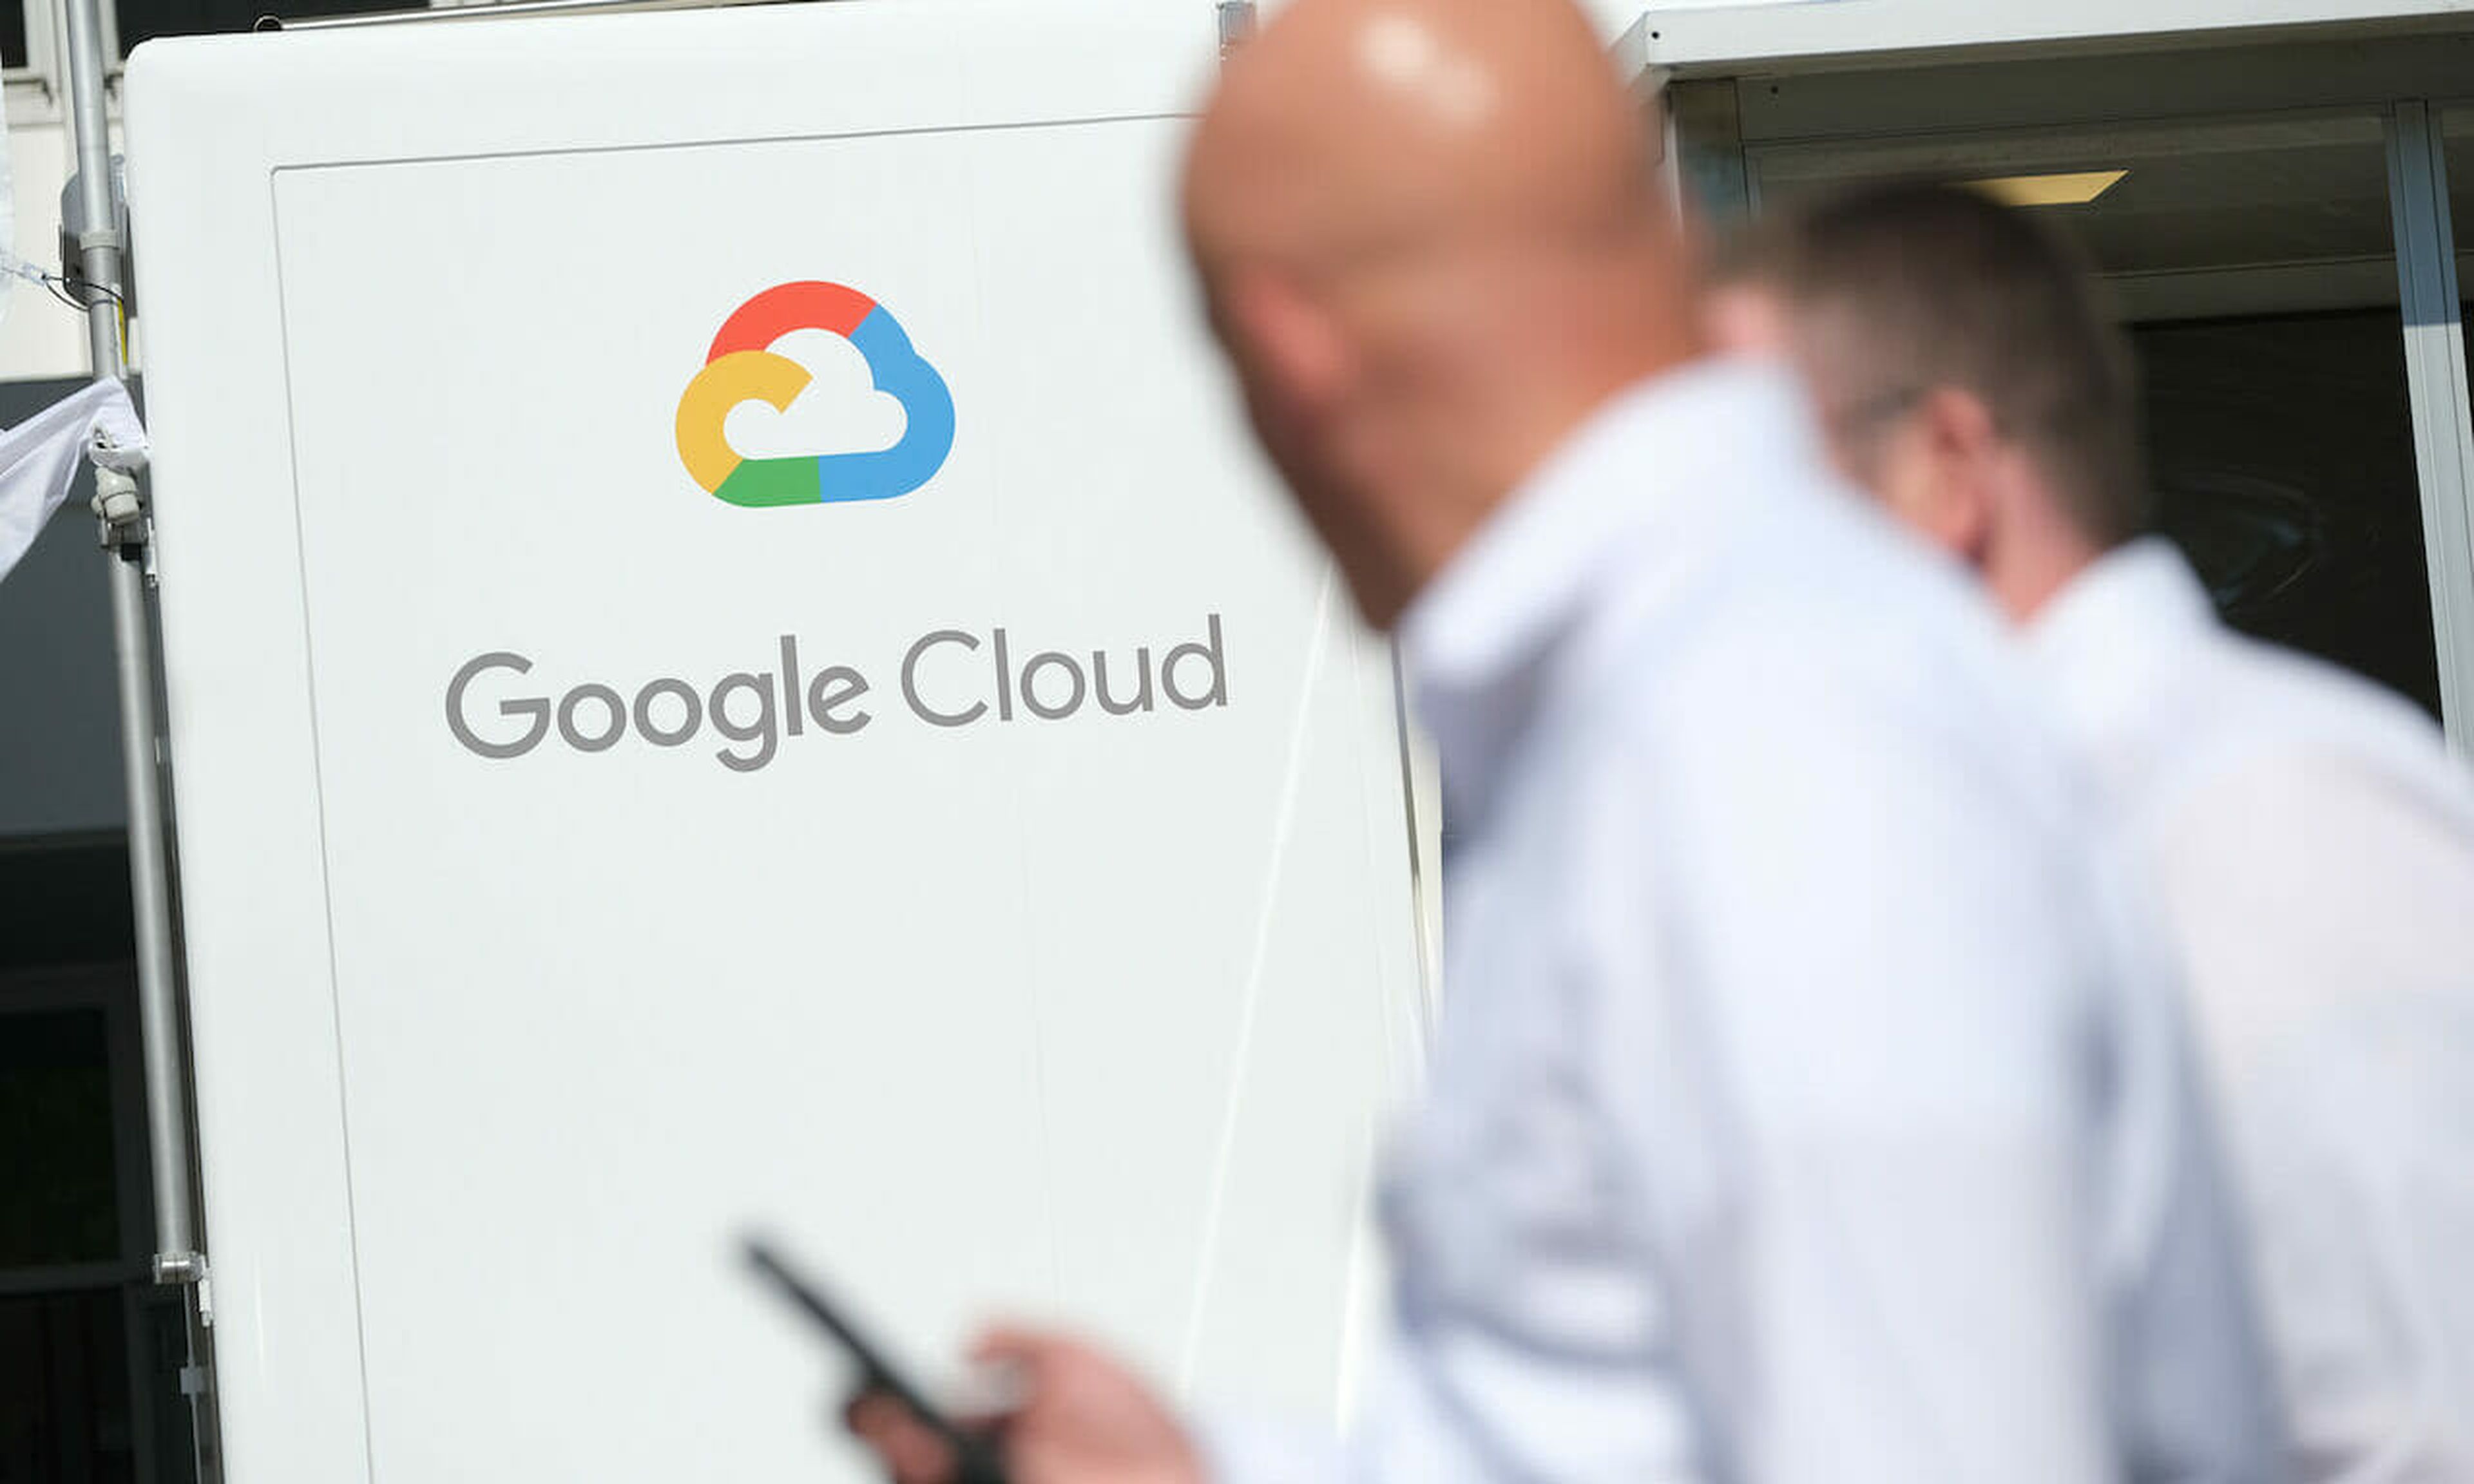 People walk past a Google Cloud exhibit during the at the 2019 IAA Frankfurt Auto Show on Sept. 11, 2019, in Frankfurt am Main, Germany. (Sean Gallup/Getty Images)